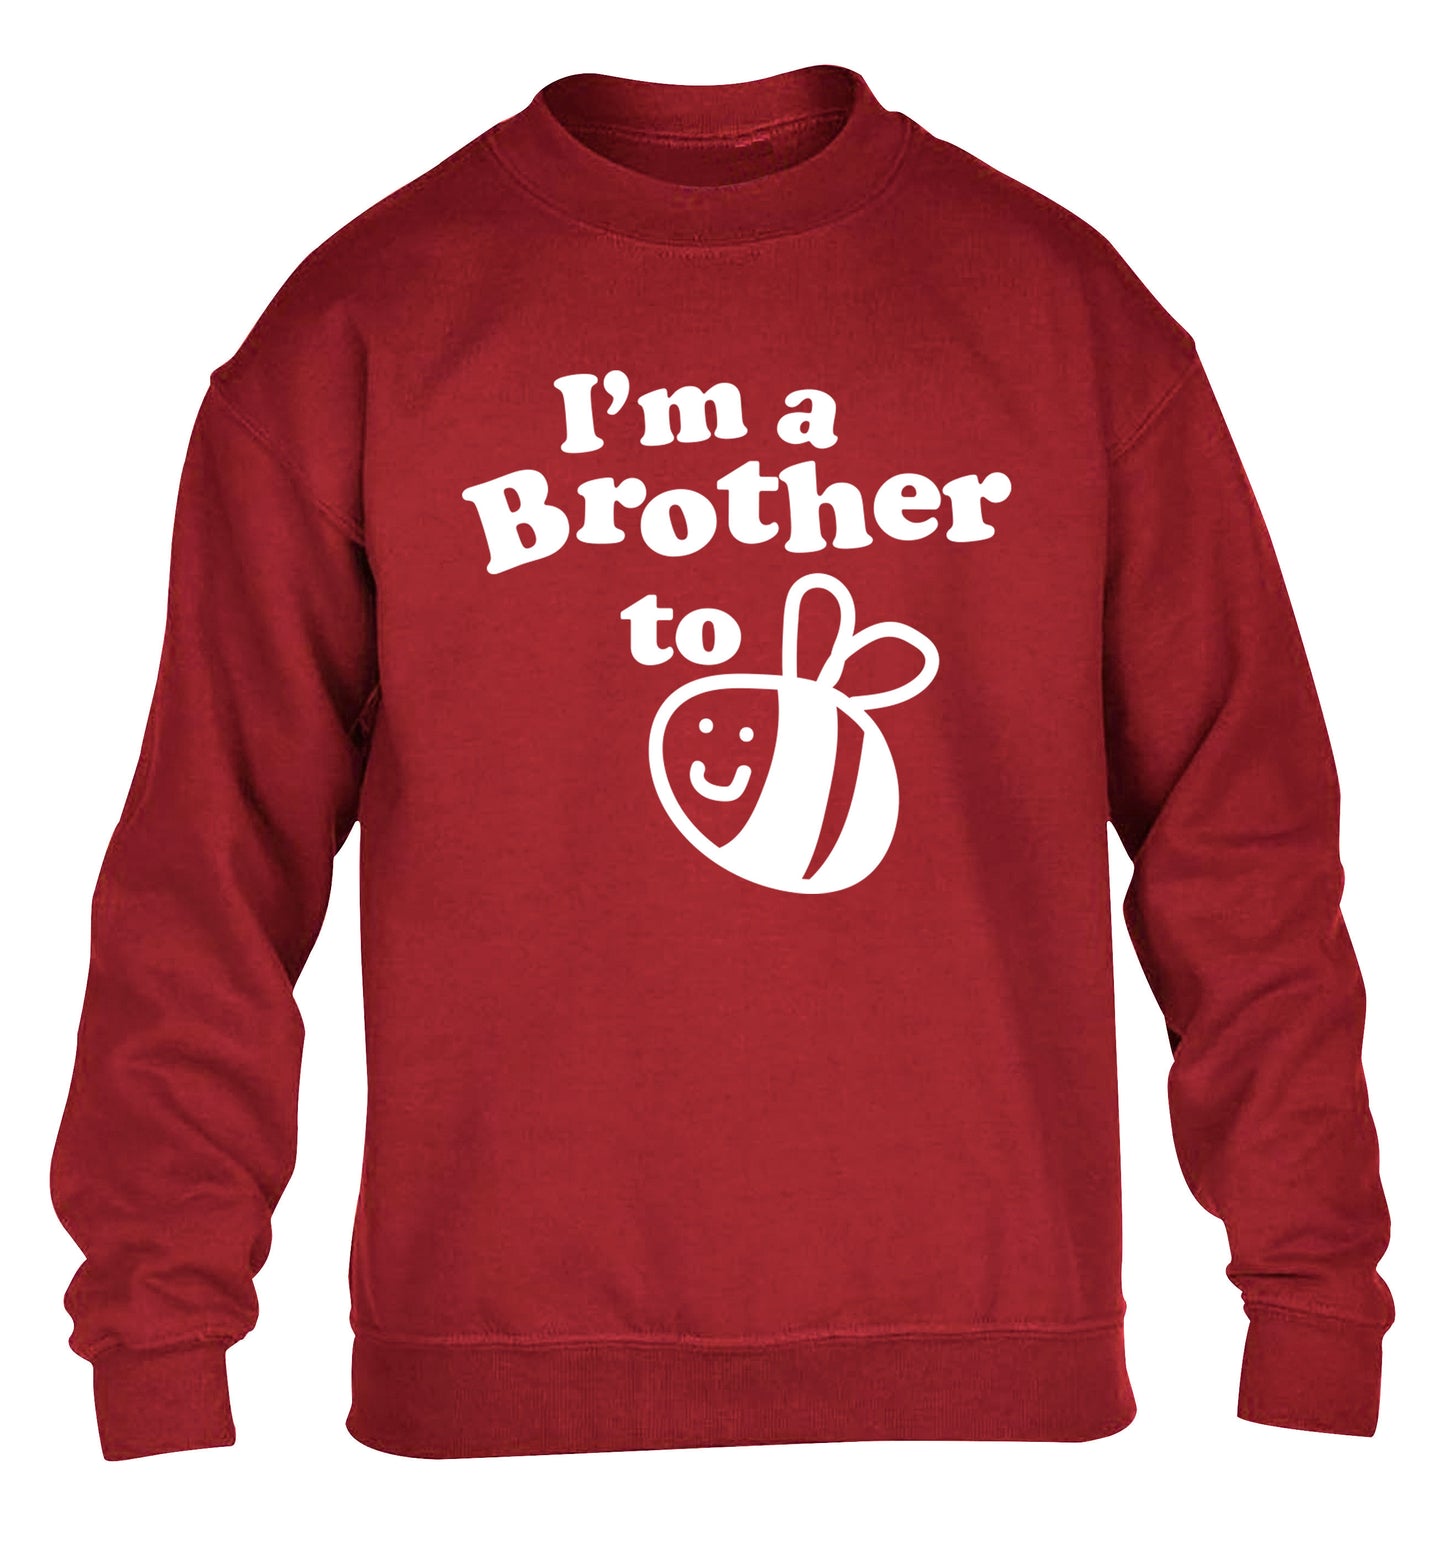 I'm a brother to be children's grey sweater 12-14 Years